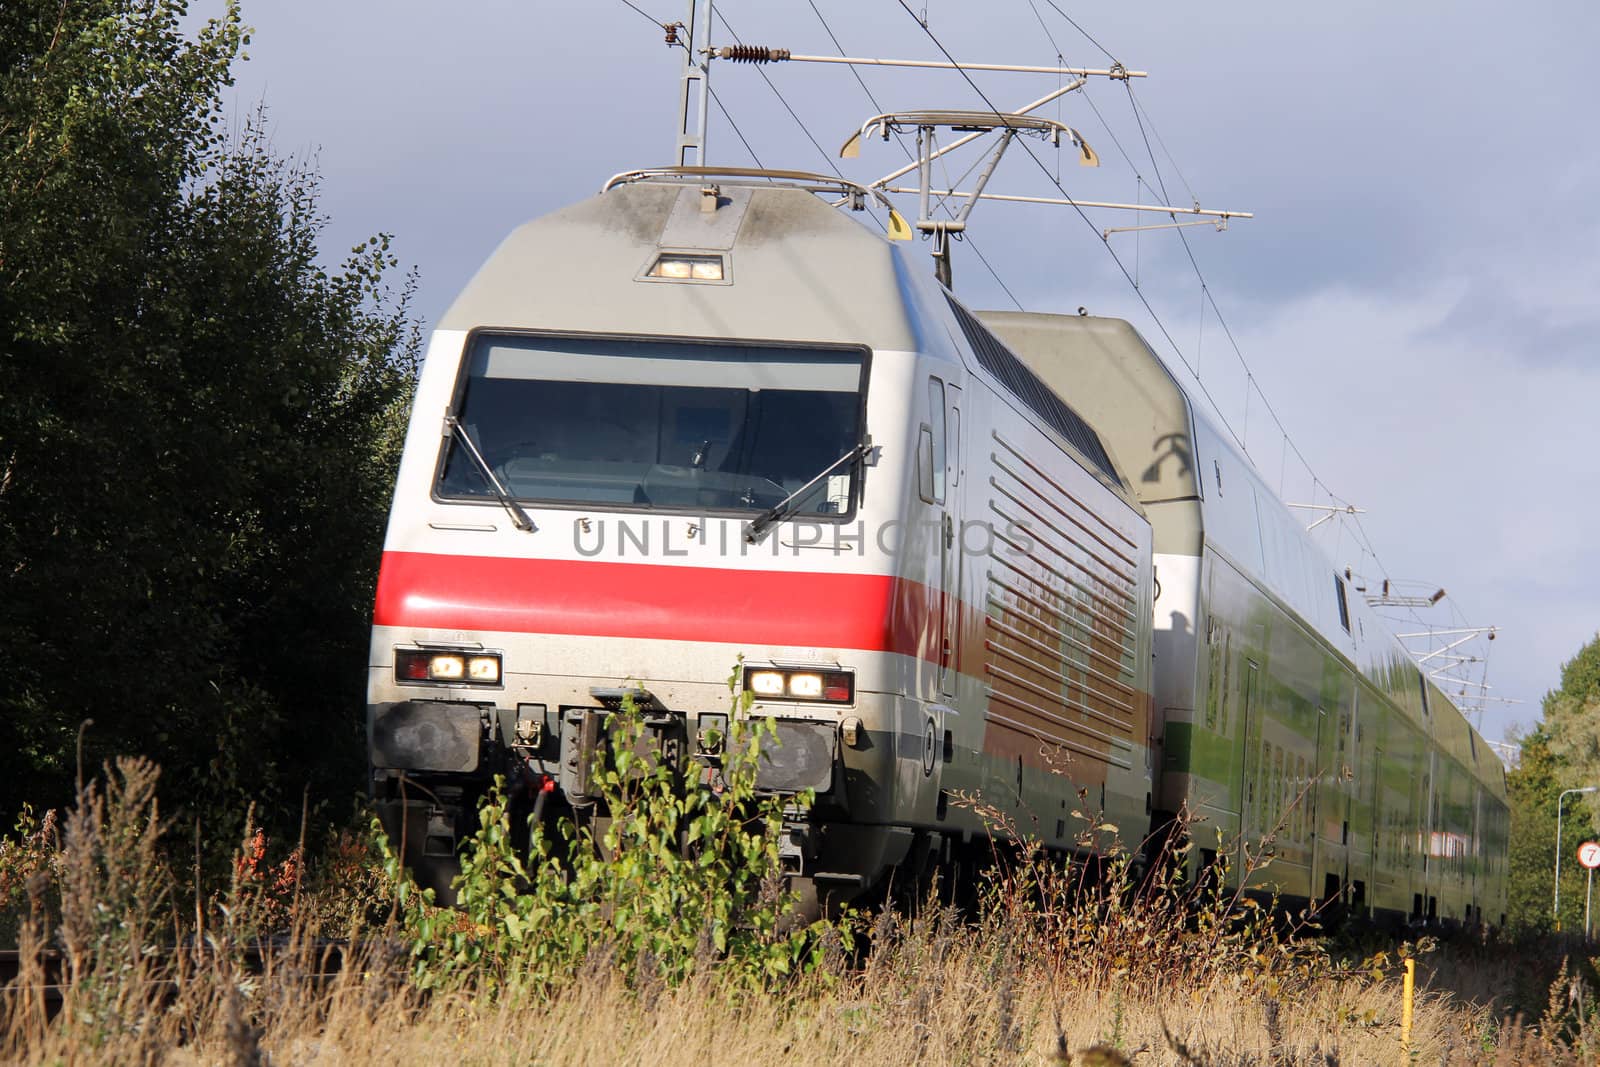 Fast moving modern electric train on a railroad.